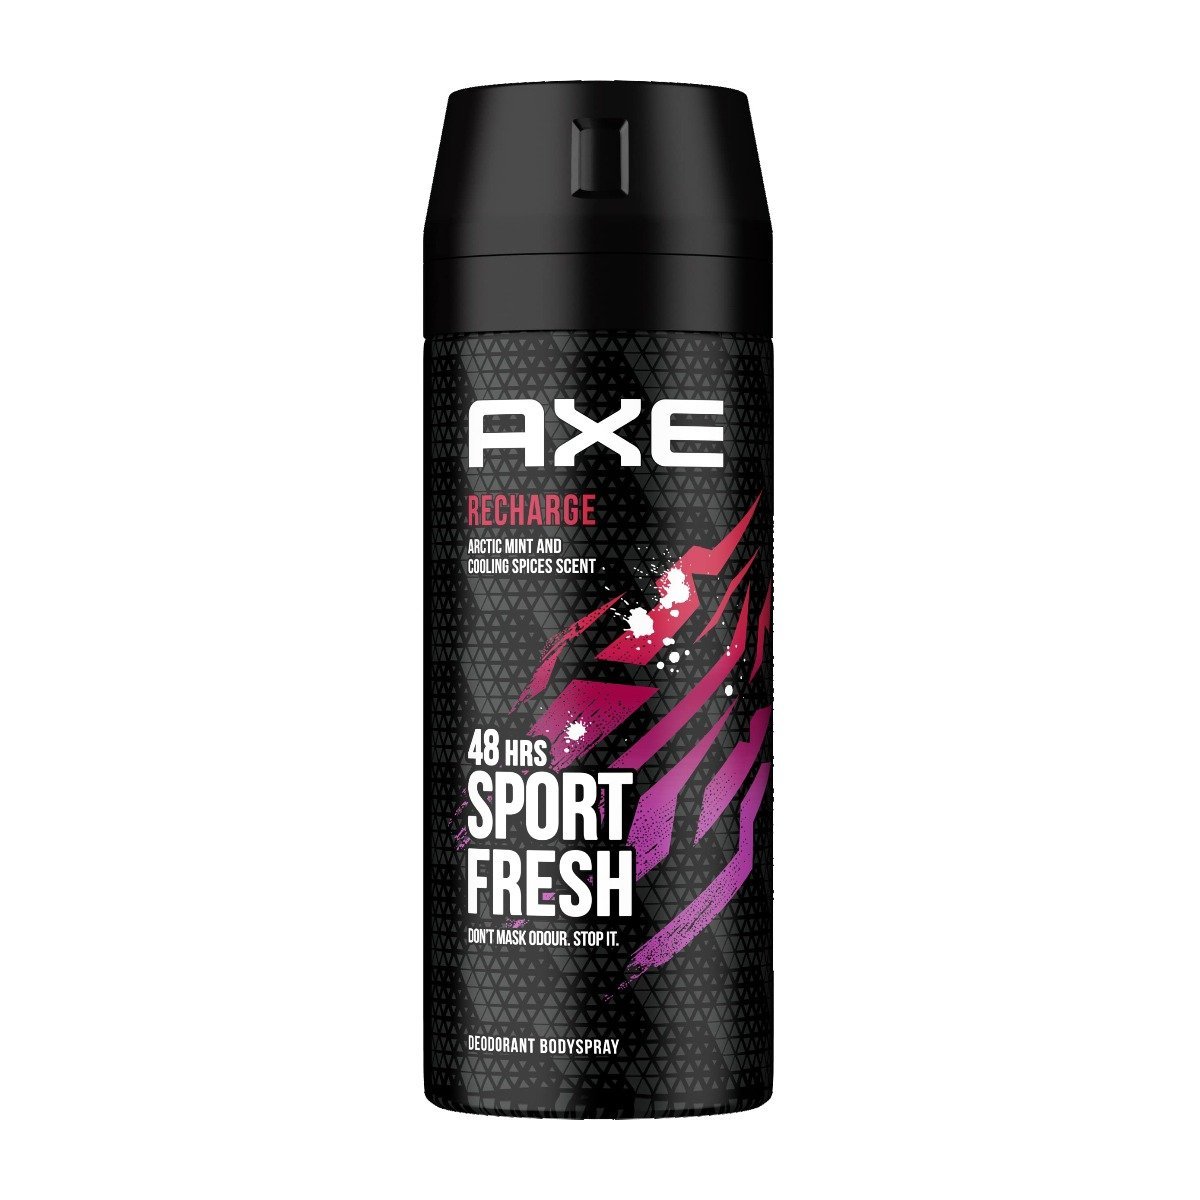 Axe Recharge Arctic Mint and Cooling Spices Scent Deodorant Body Spray - 150ml - Bloom Pharmacy